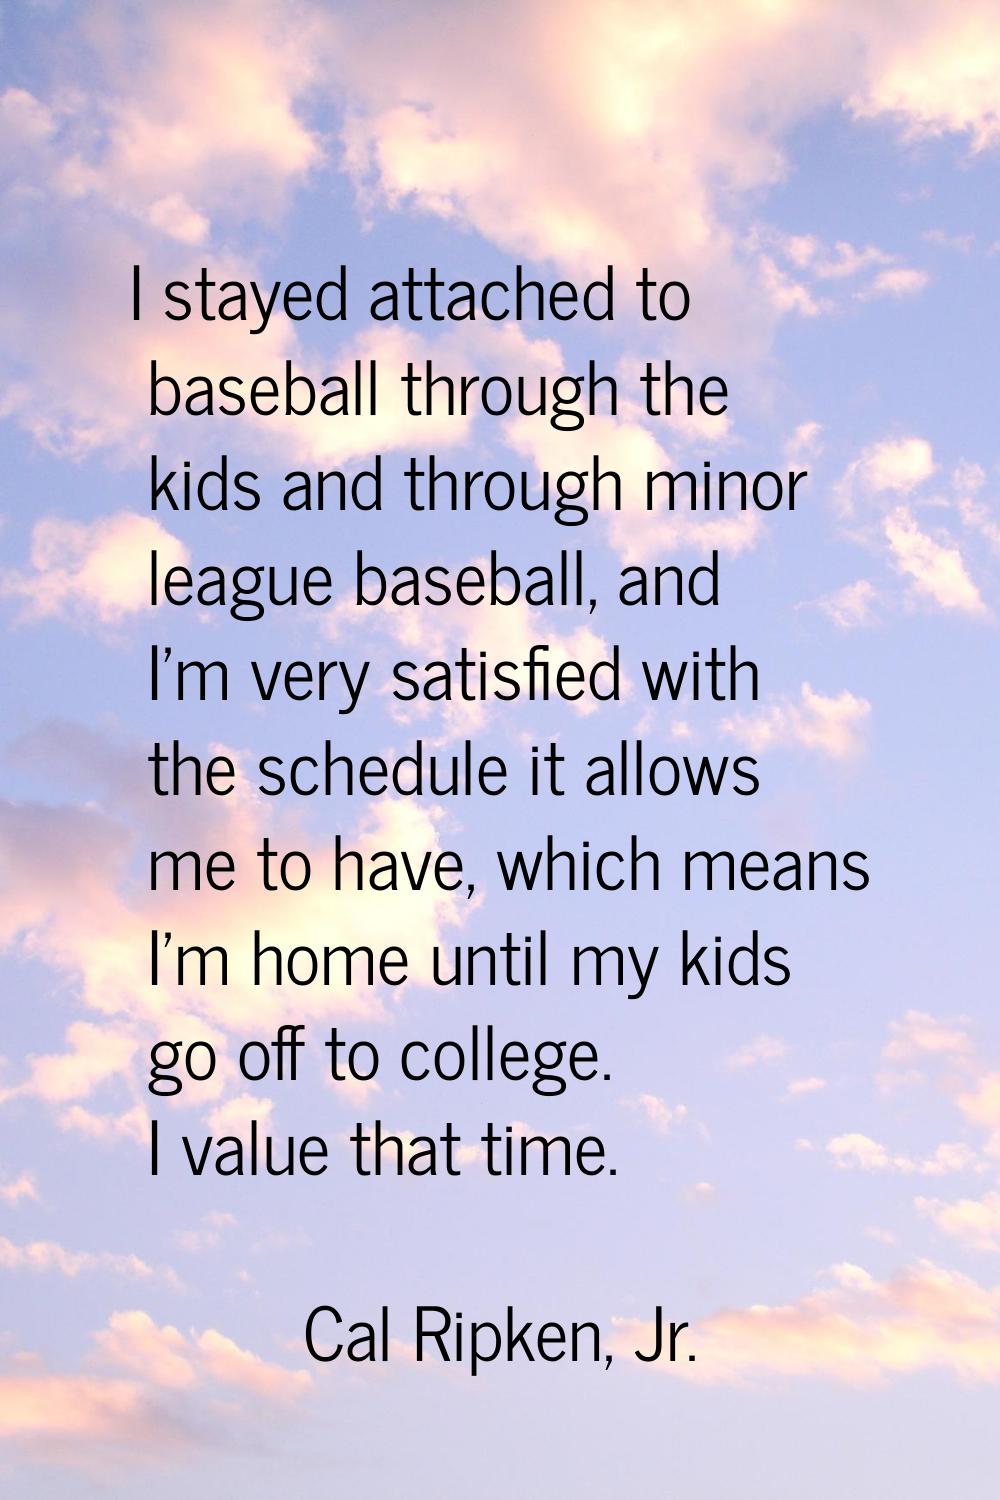 I stayed attached to baseball through the kids and through minor league baseball, and I'm very sati